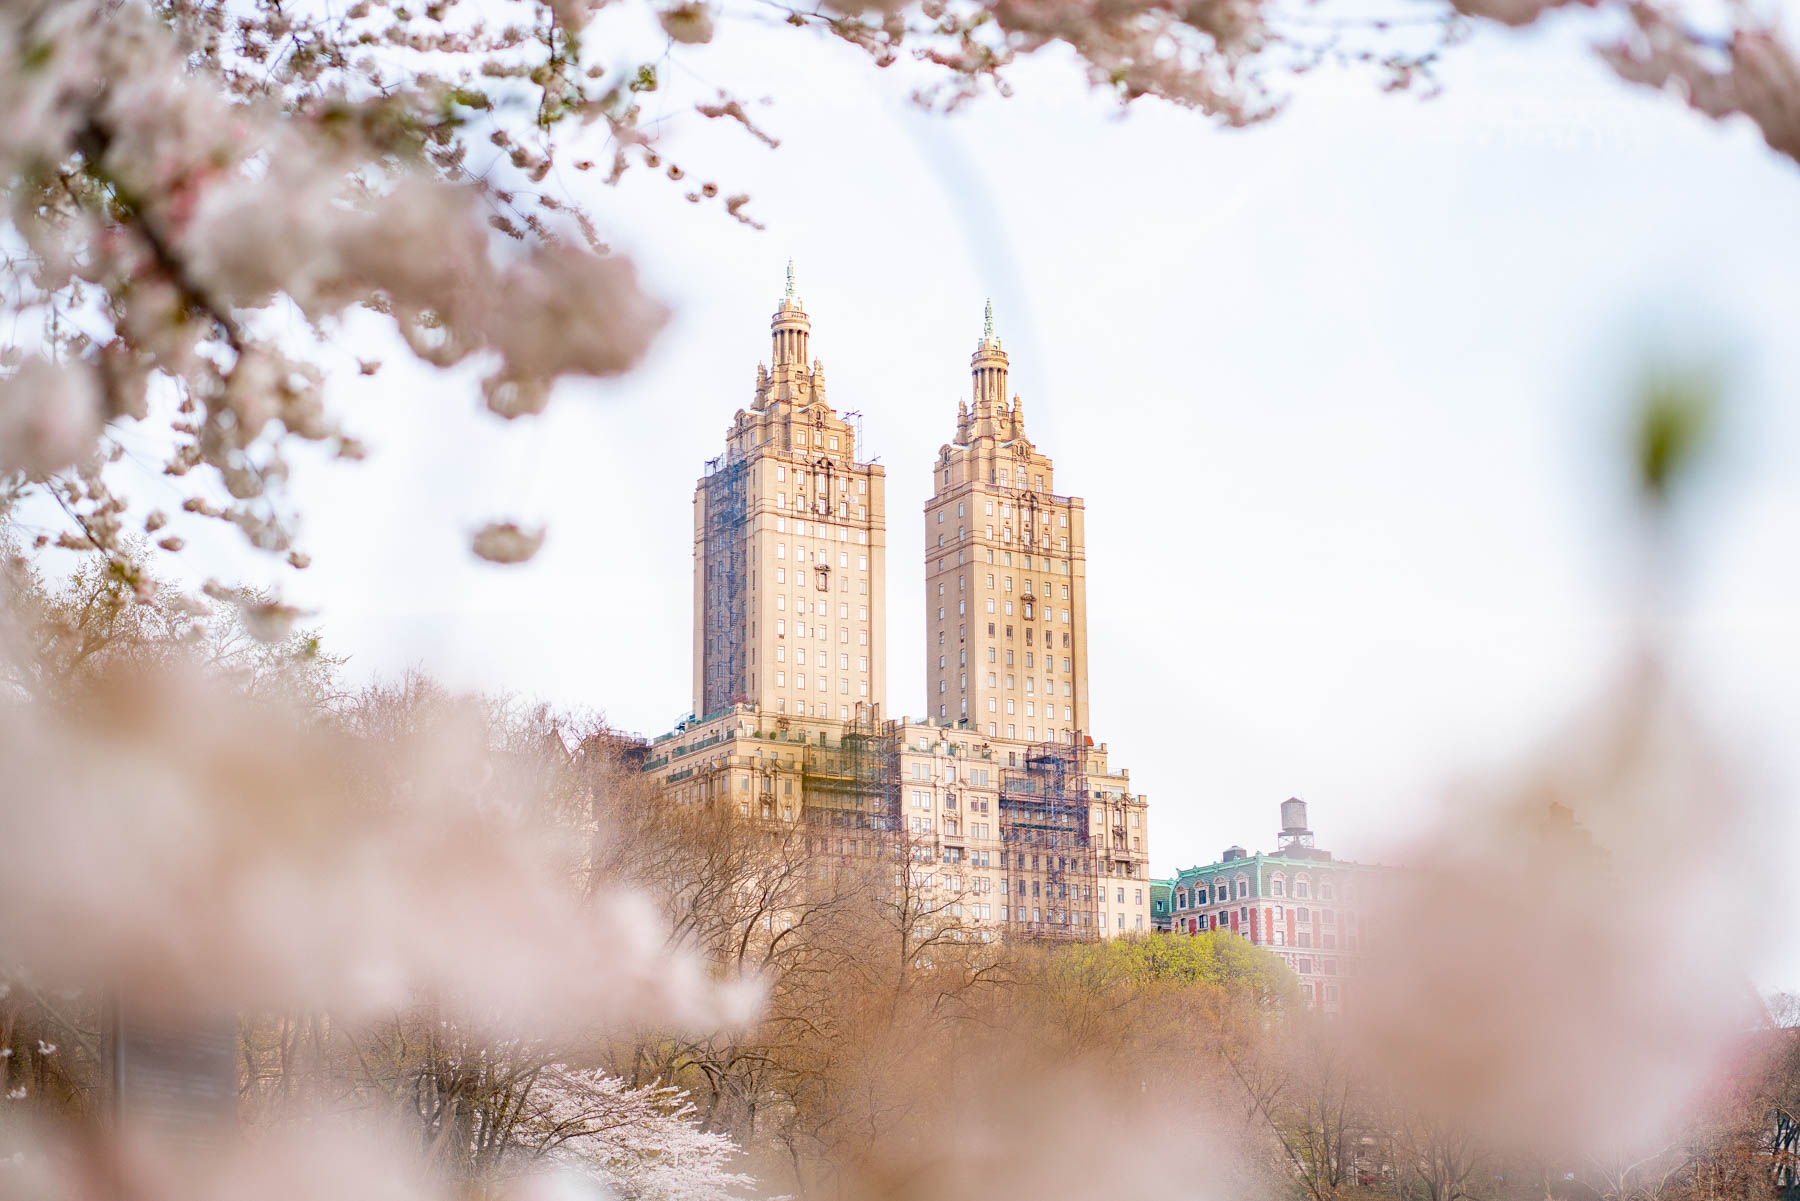 Cool facts about Central Park